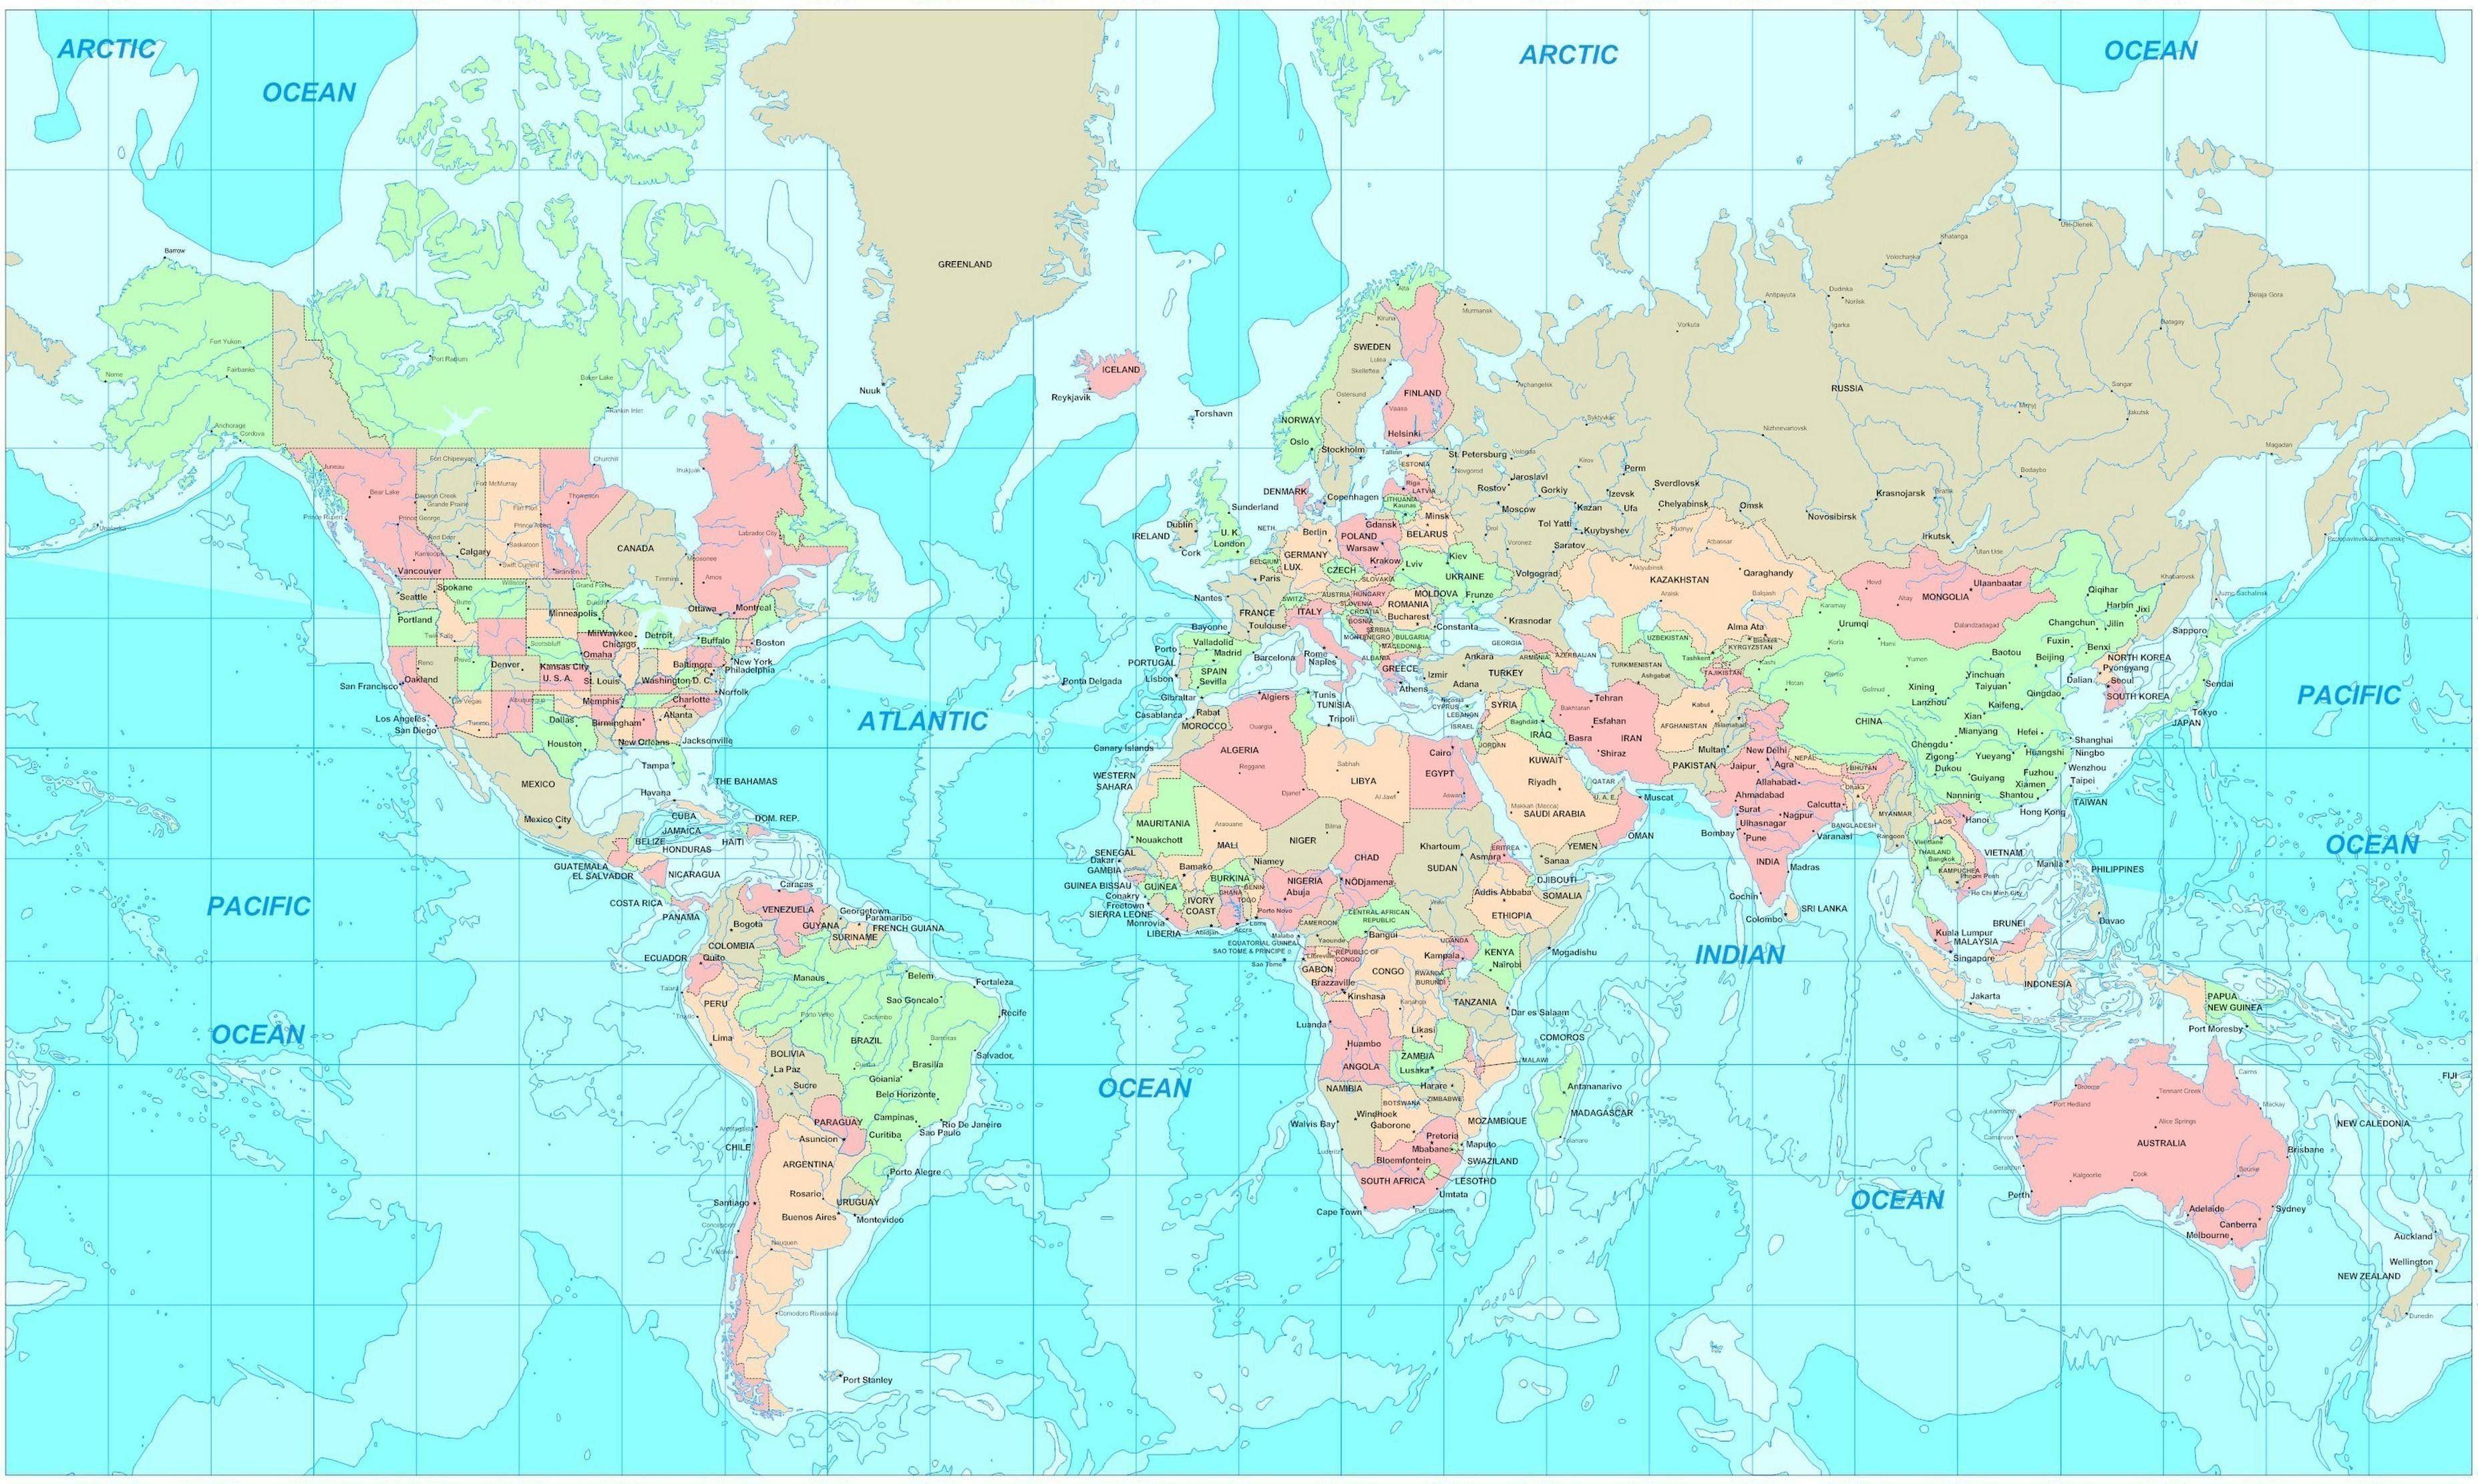 Geographical World Map High Resolution Fresh Download 4k Wallpaper